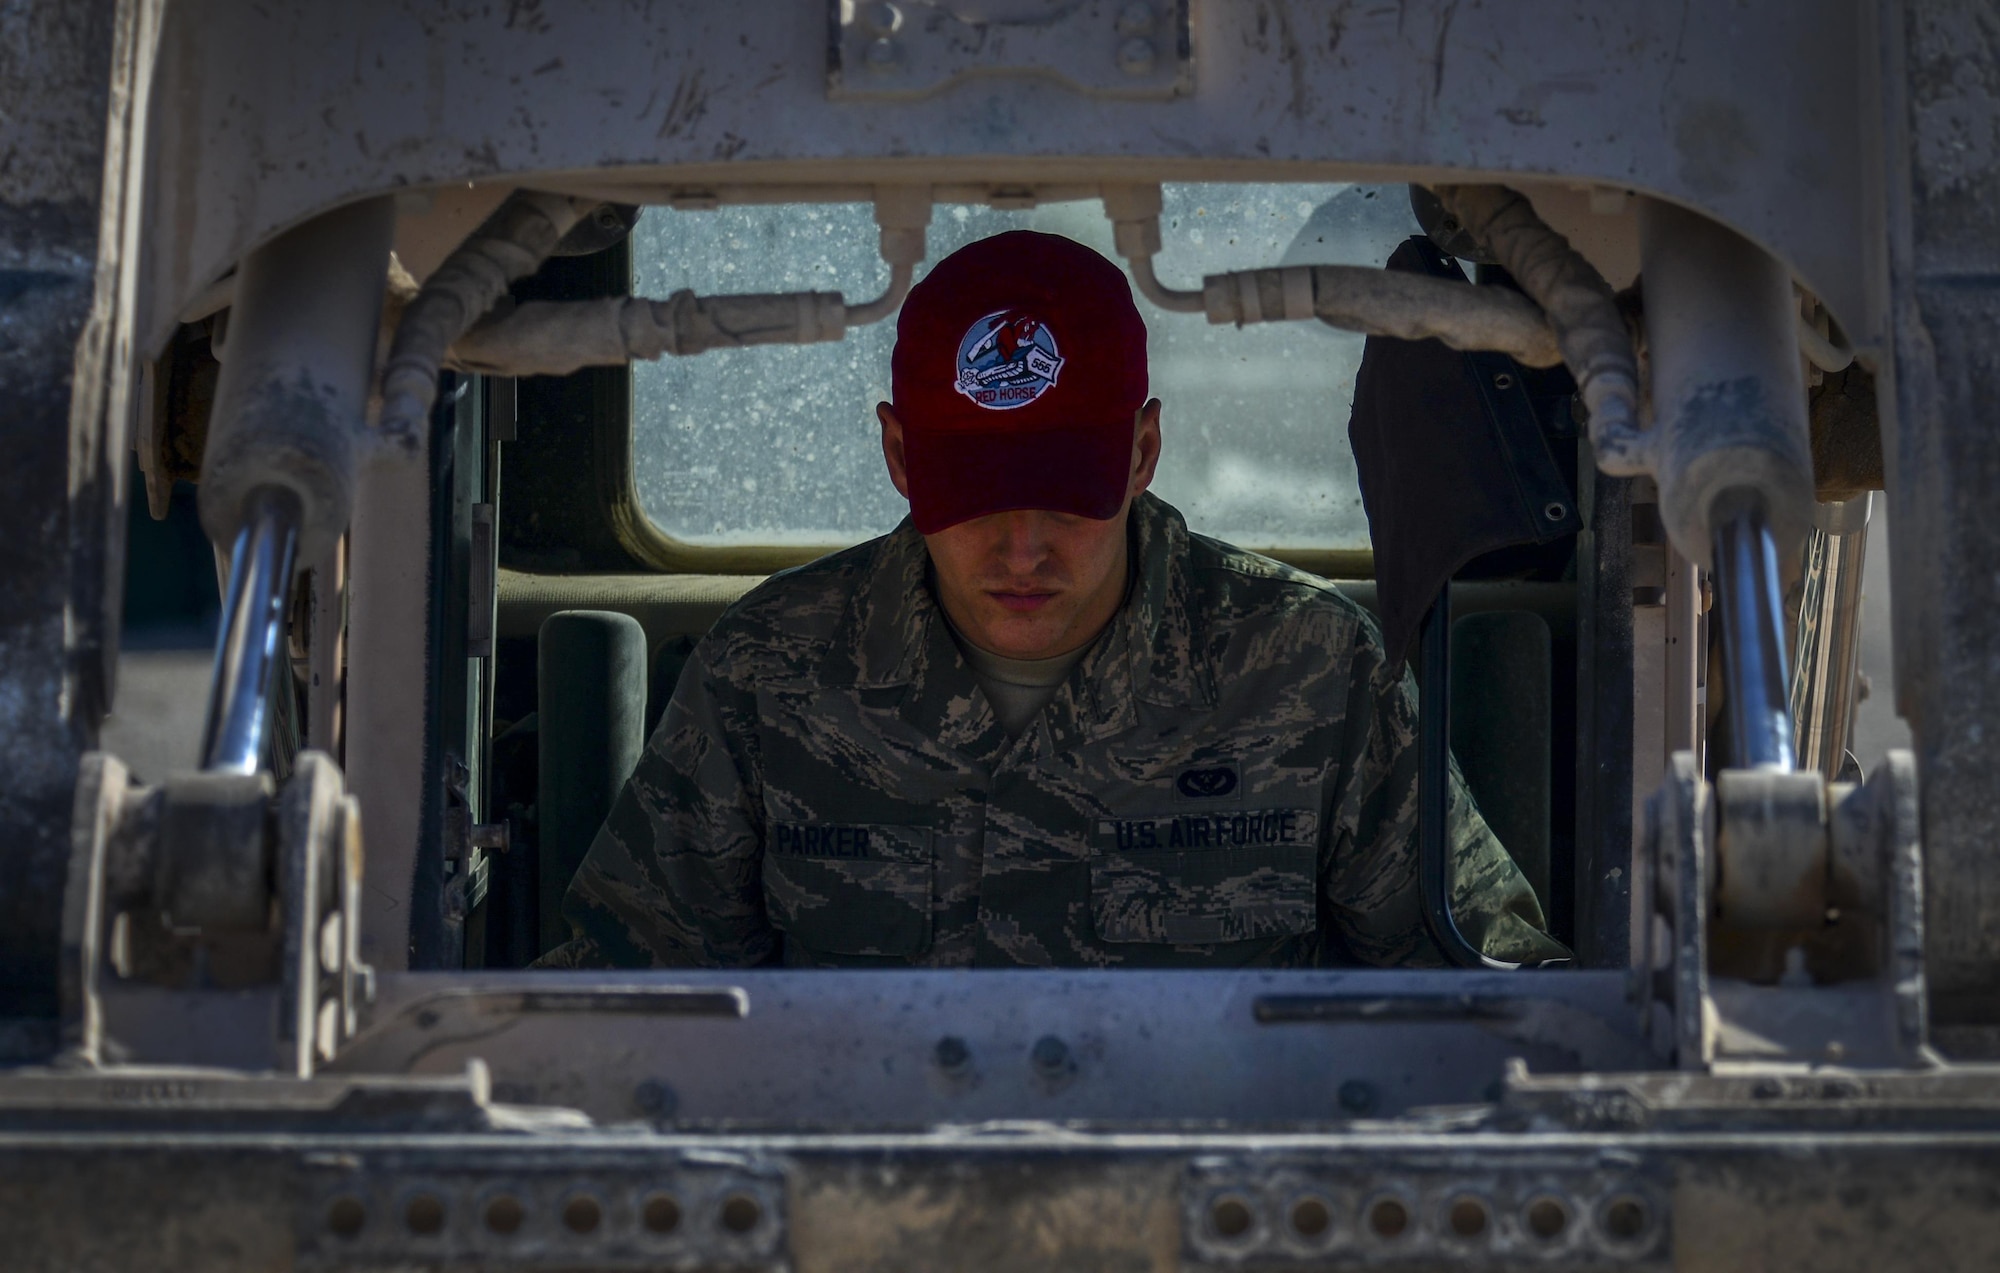 Airman 1st Class Joshua Parker, 555th Red Horse Squadron heavy equipment operator, uses a loader to cover the lightning protection rods for the new firehouse at Nellis Air Force Base, Nev., April 2, 2016. In accomplishing what is needed, the 555th RHS has had an integral part in constructing the new firehouse on base. (U.S. Air Force photo by Airman 1st Class Kevin Tanenbaum)